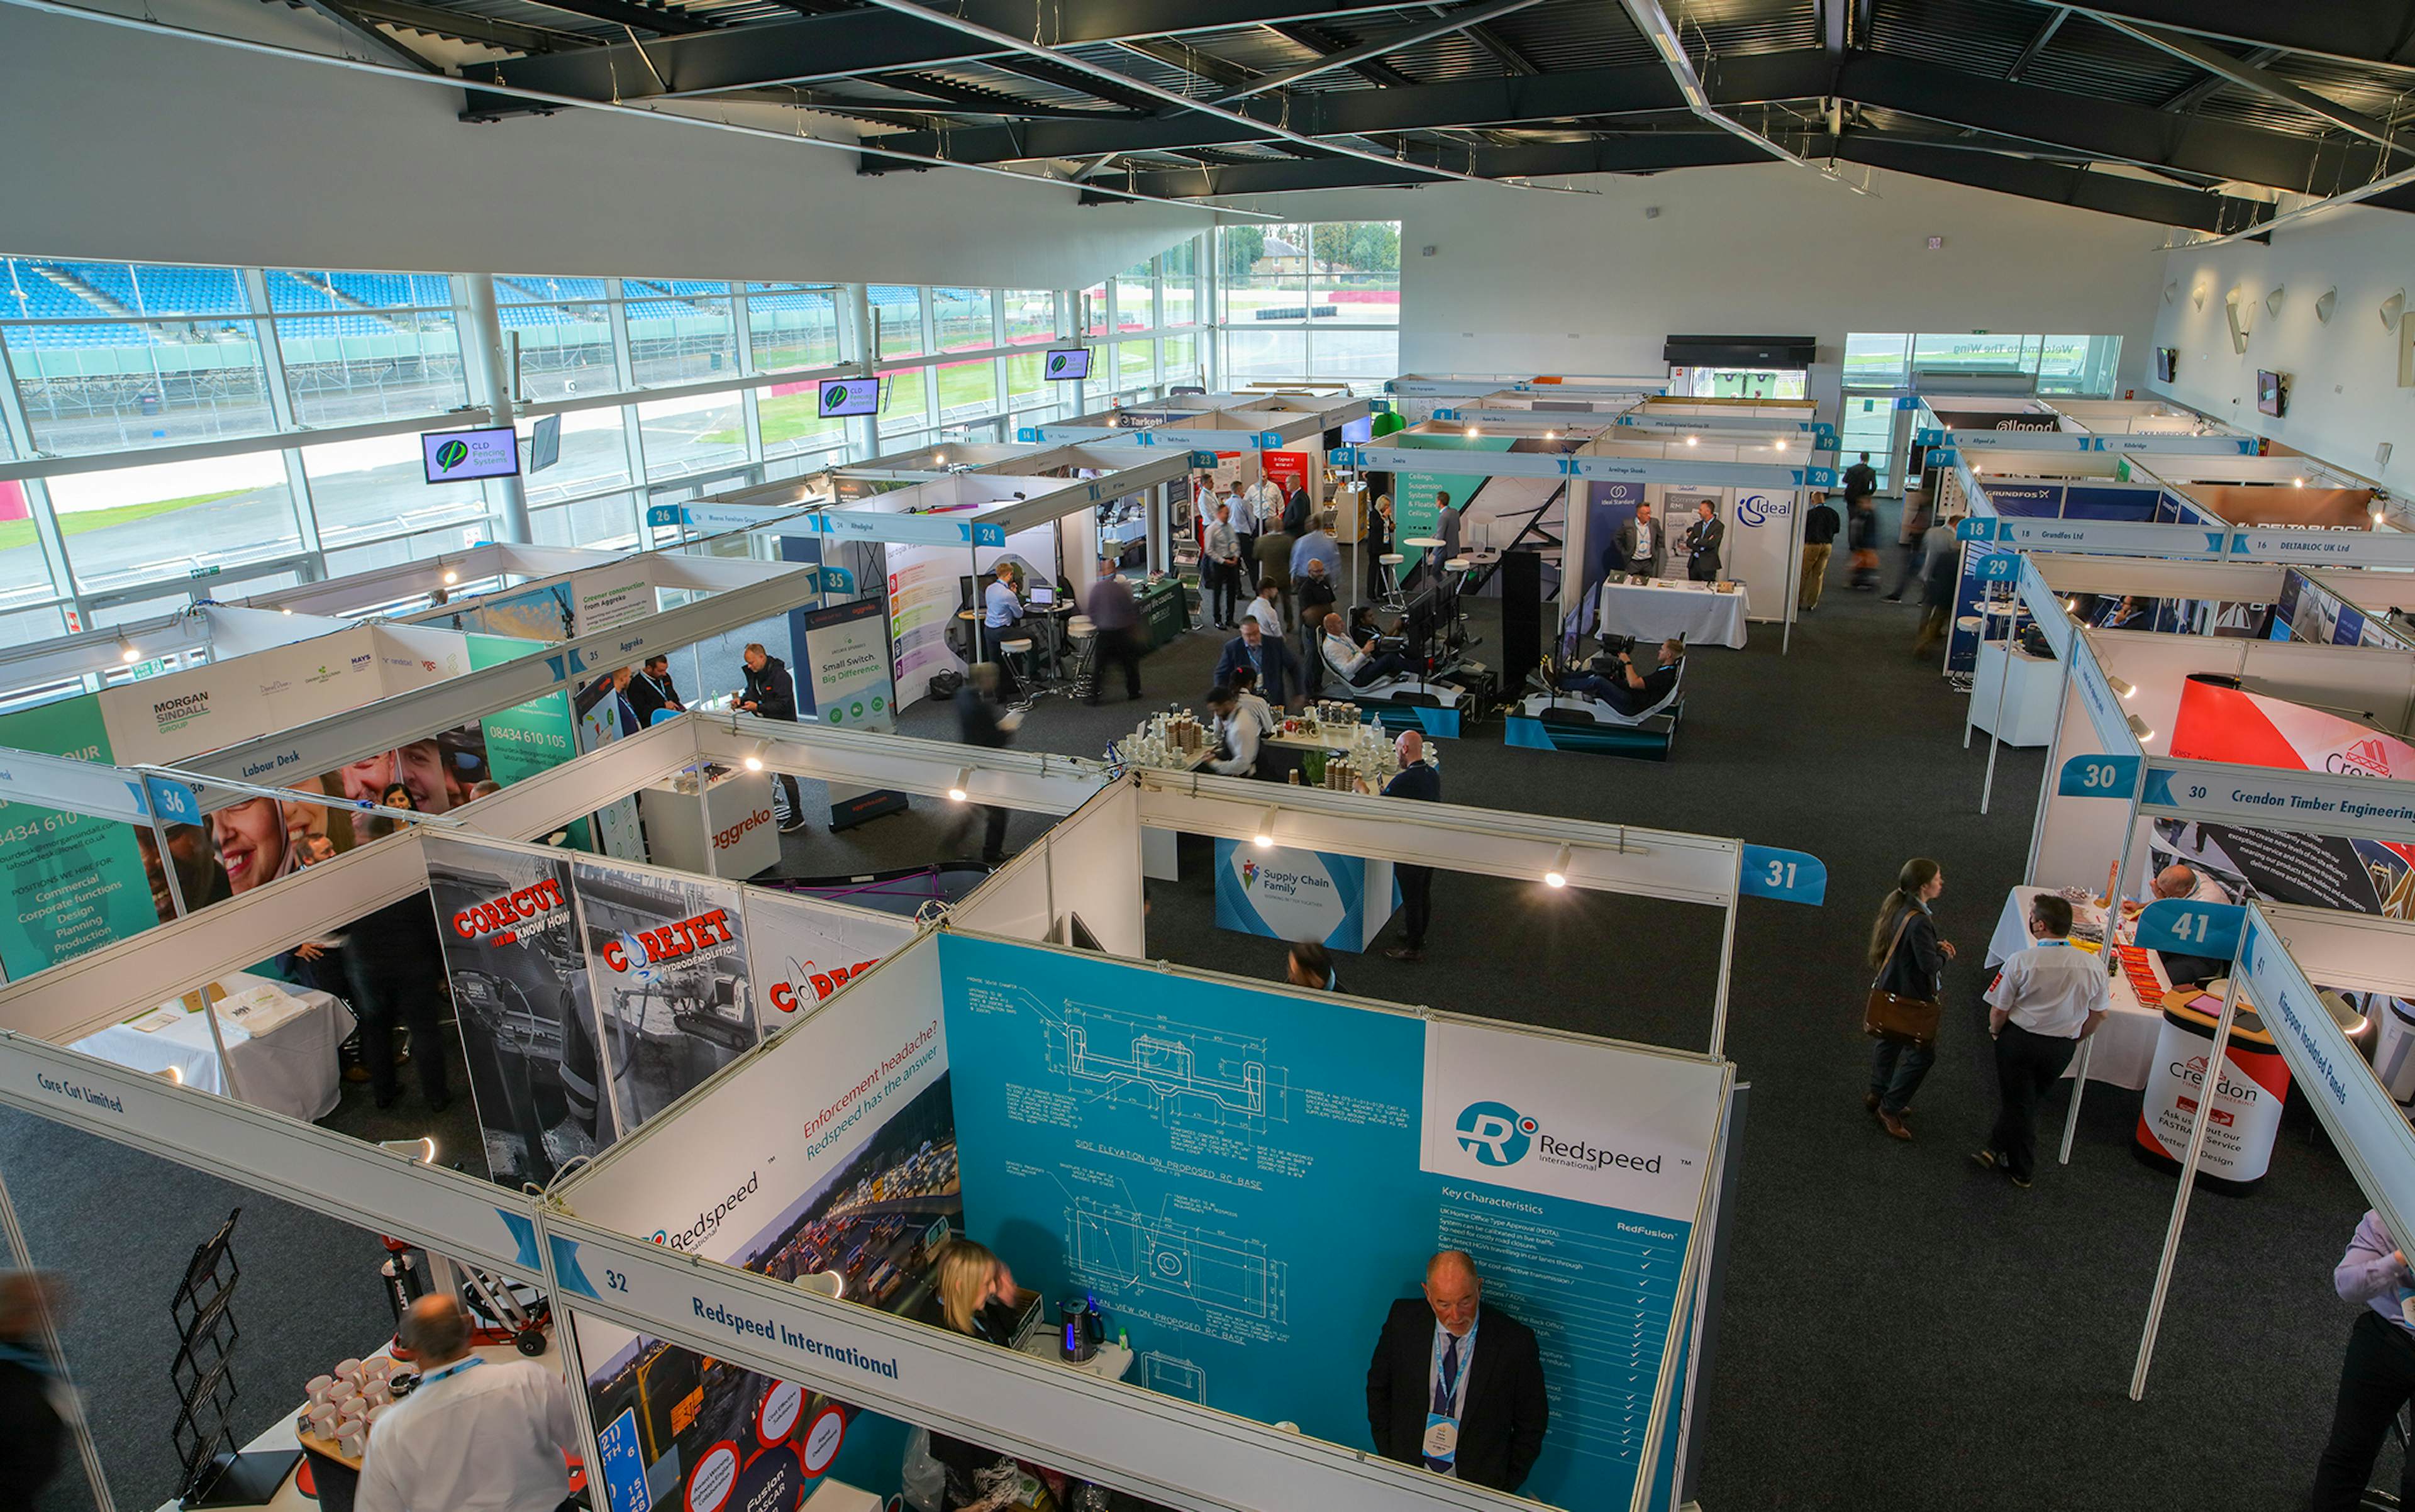 Silverstone International Conference & Exhibition Centre - image 1